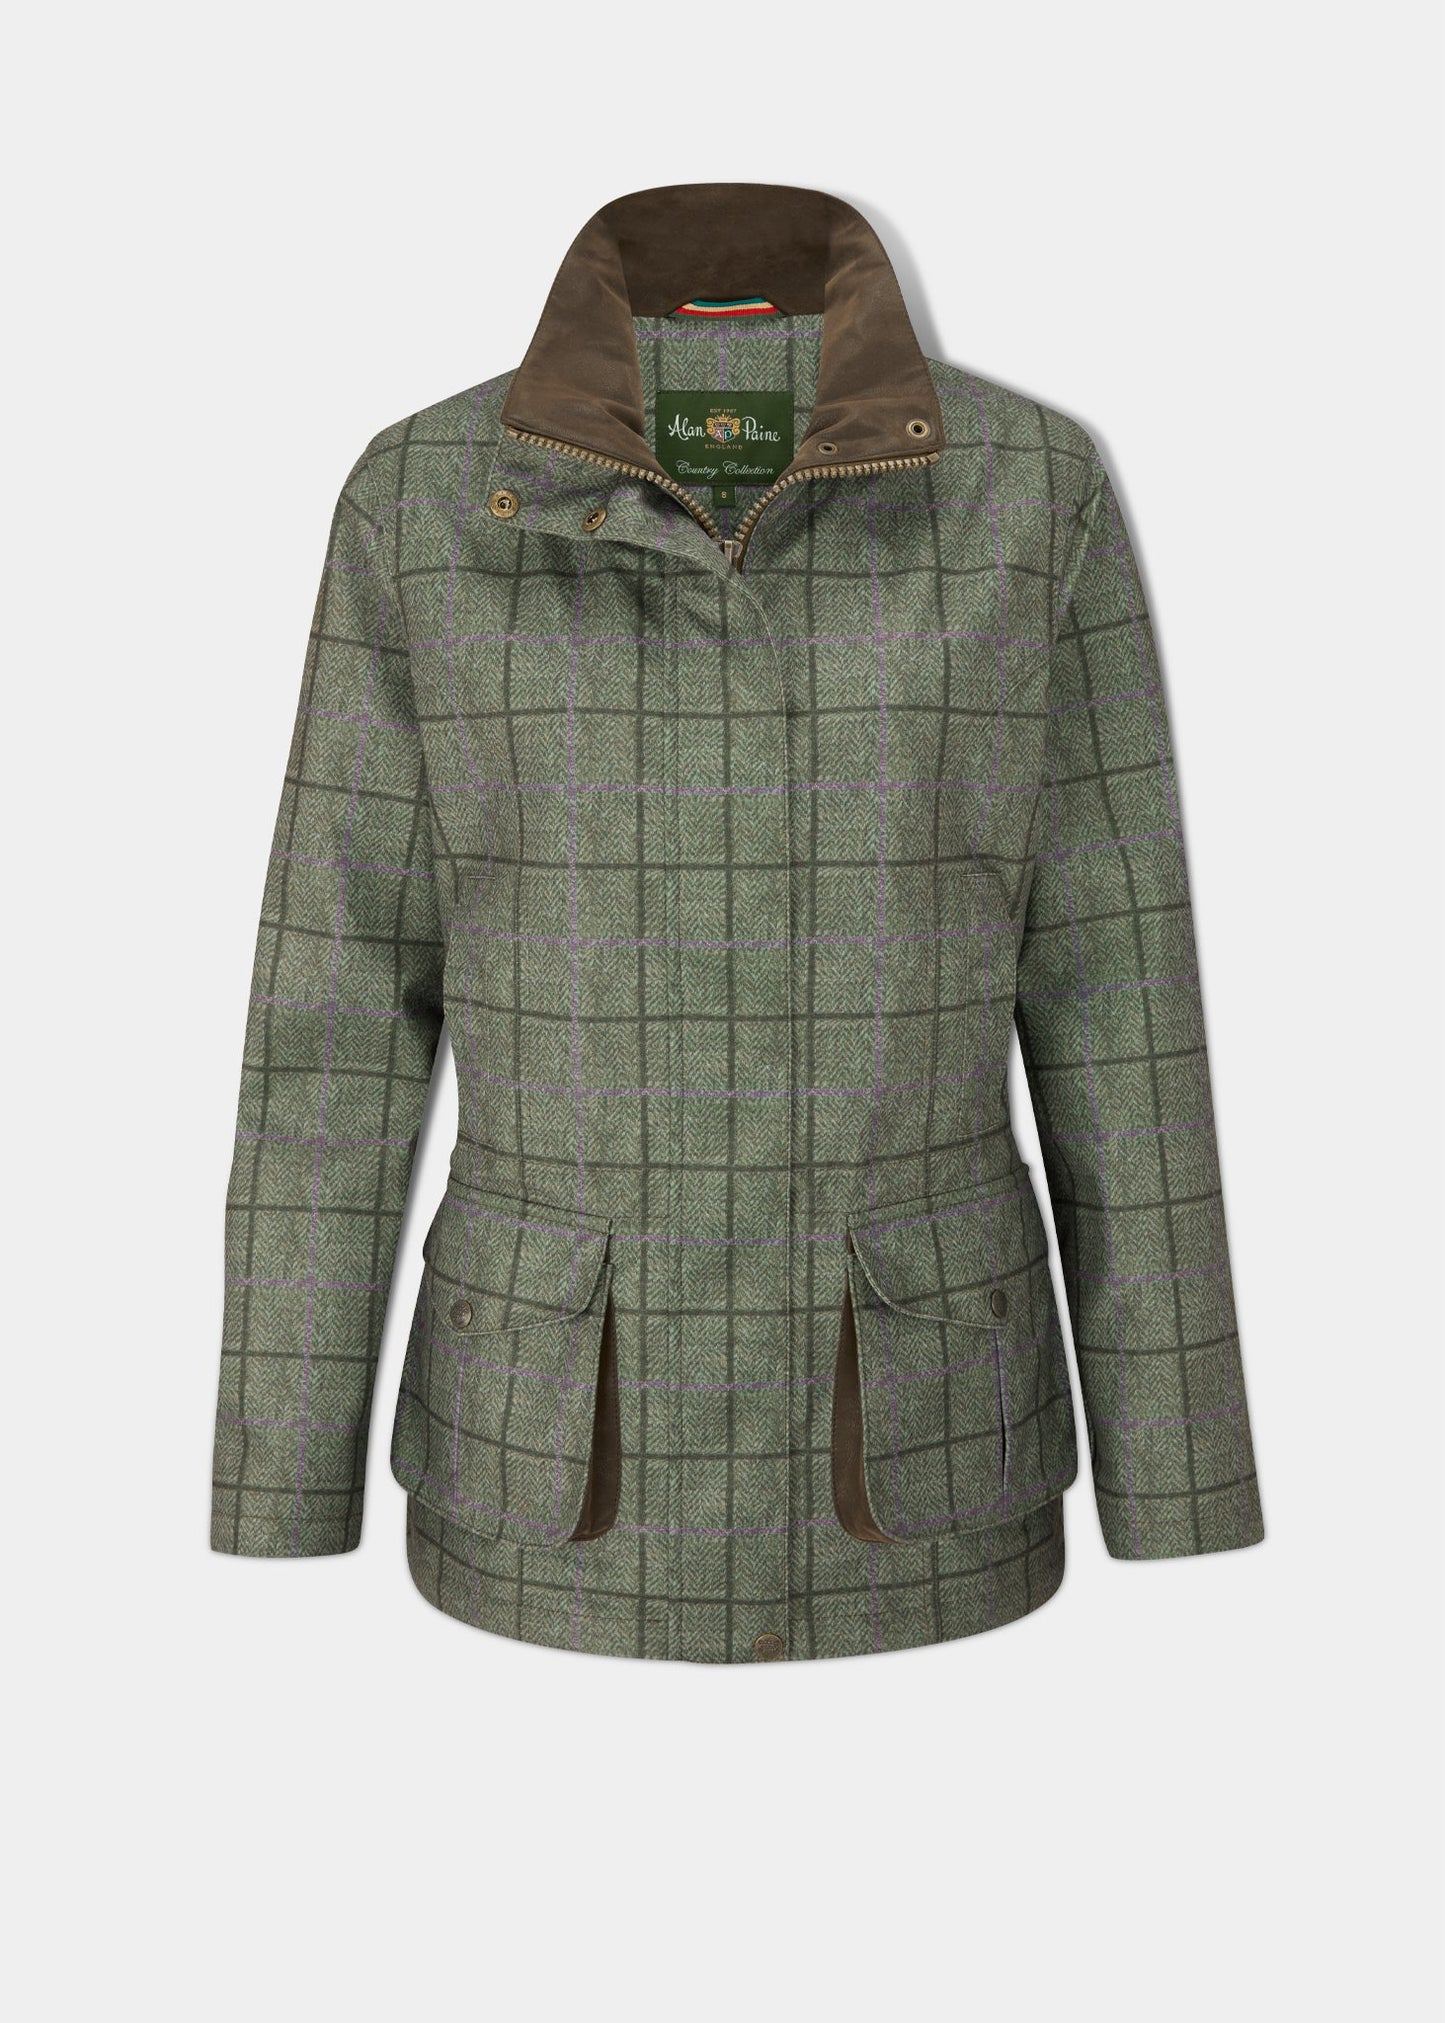 Didsmere Ladies Coat In Seagrass